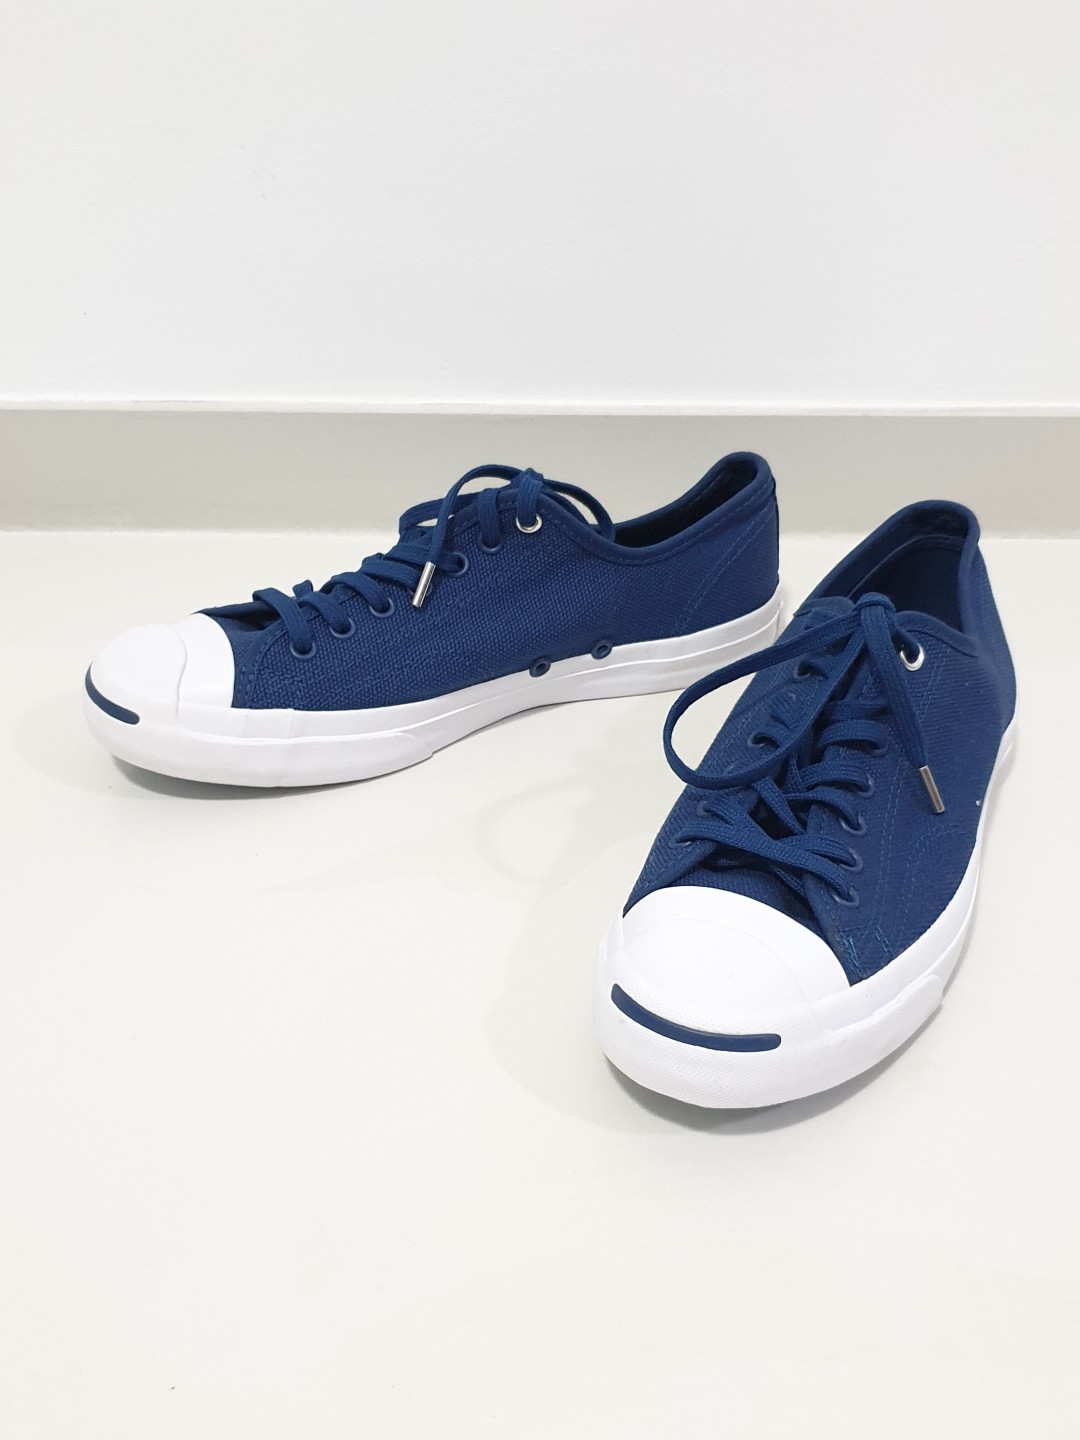 converse jack purcell heavy canvas r